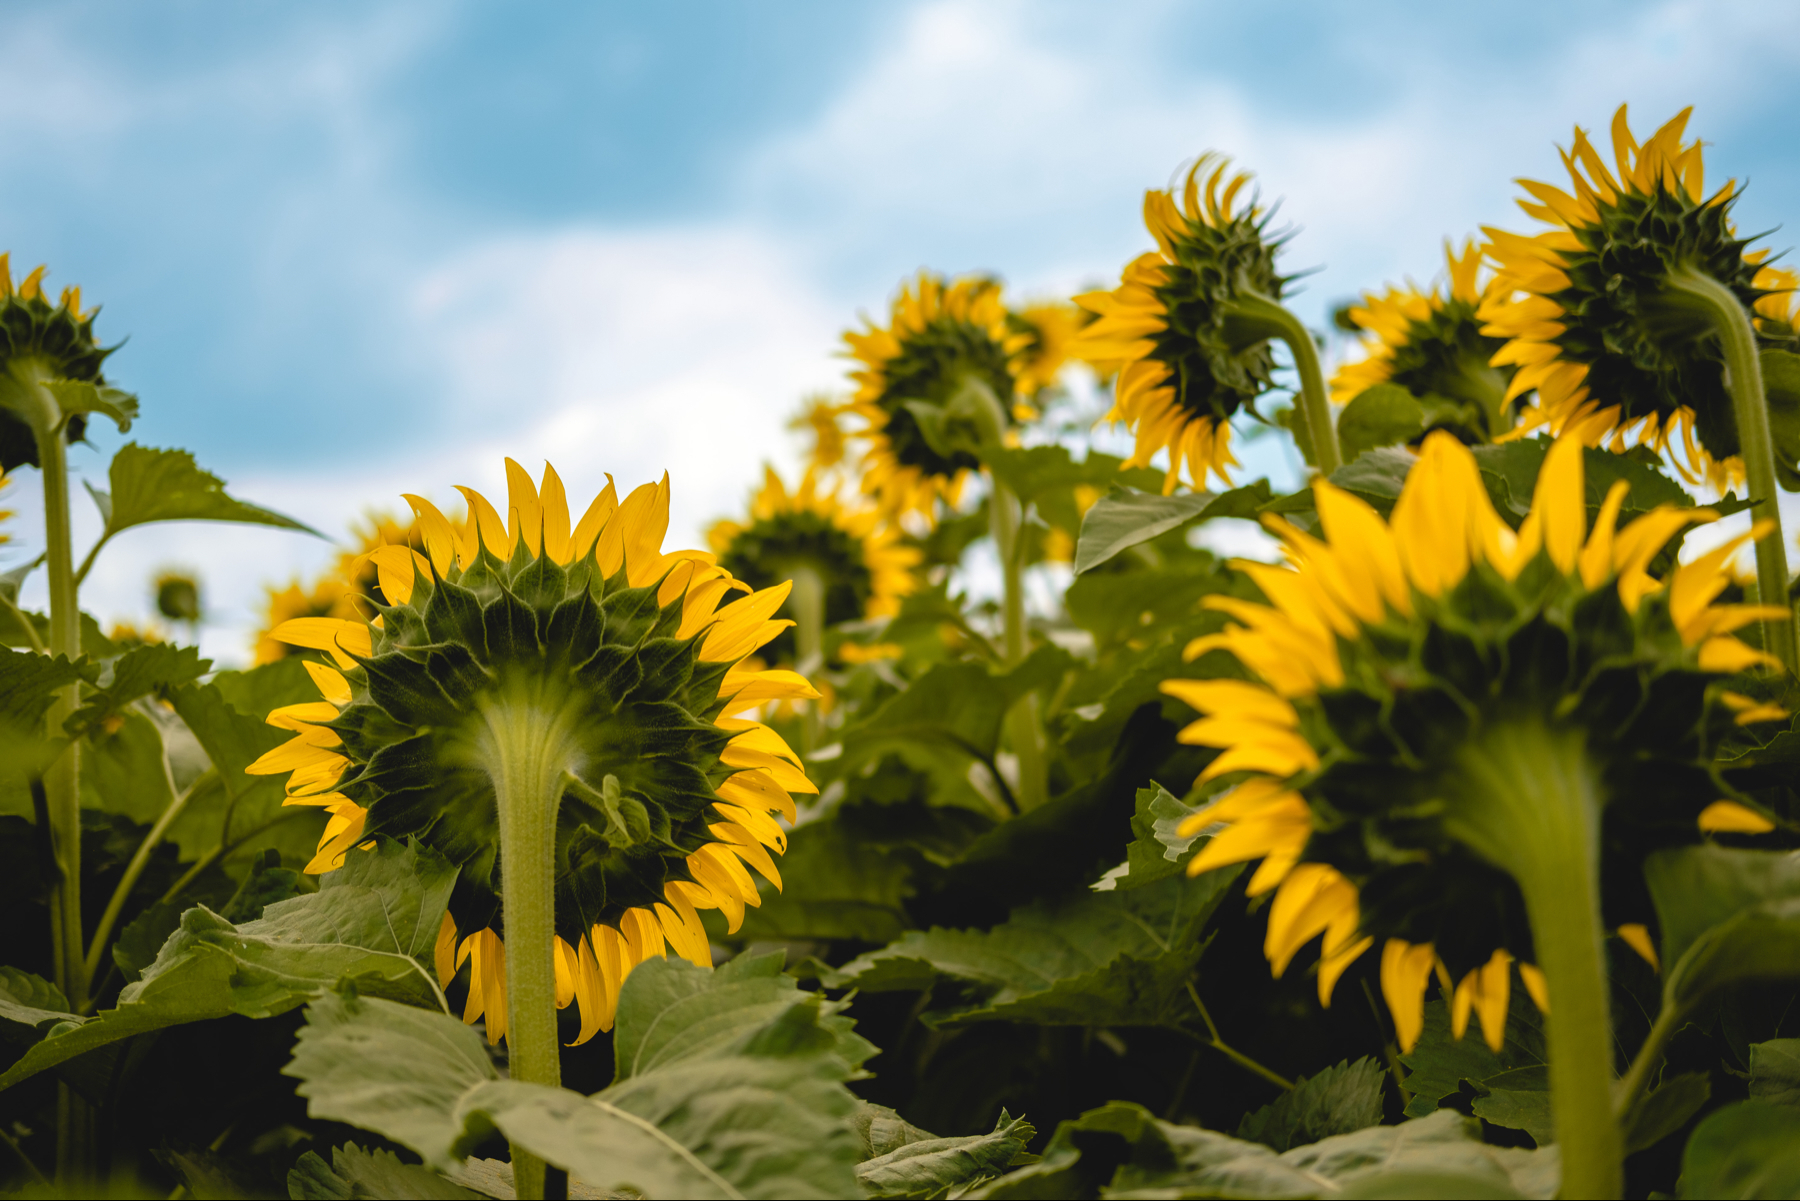 A field of sunflowers with their heads turned away from the camera against a partly cloudy sky.